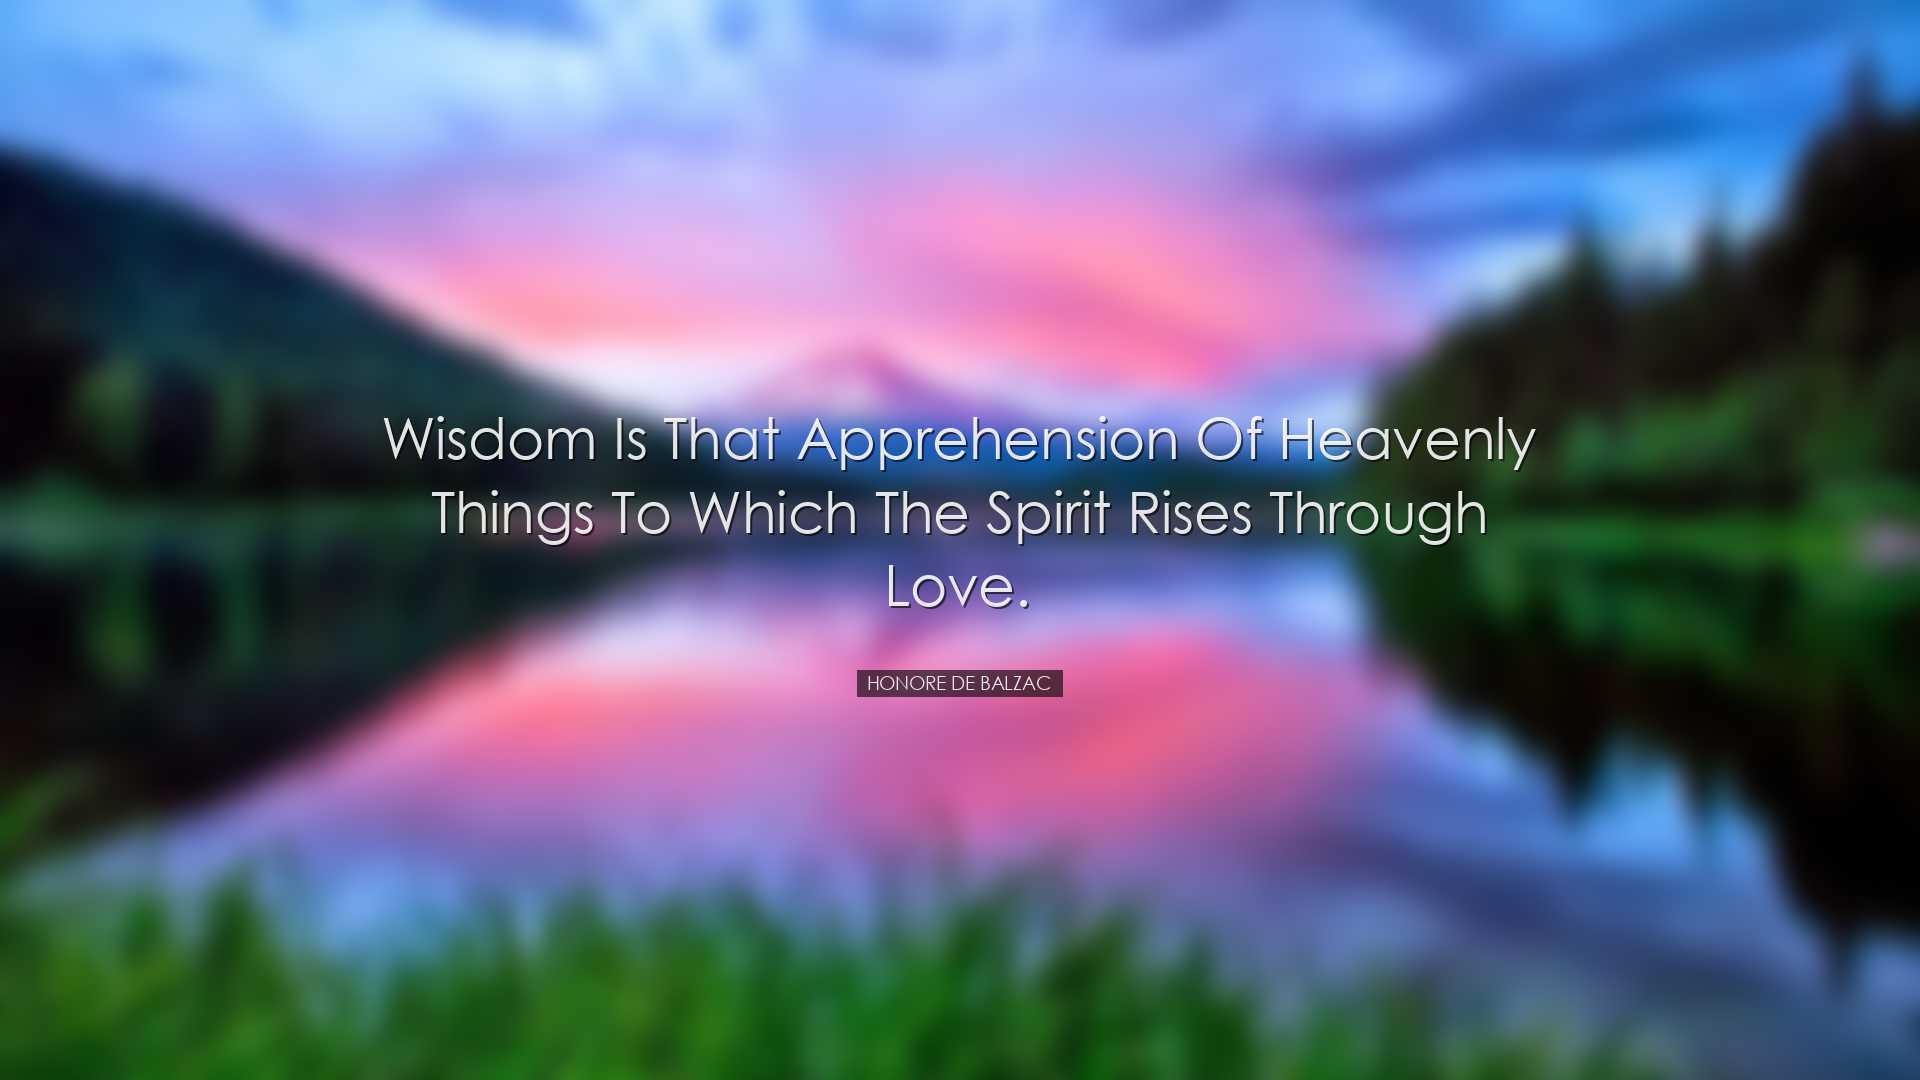 Wisdom is that apprehension of heavenly things to which the spirit